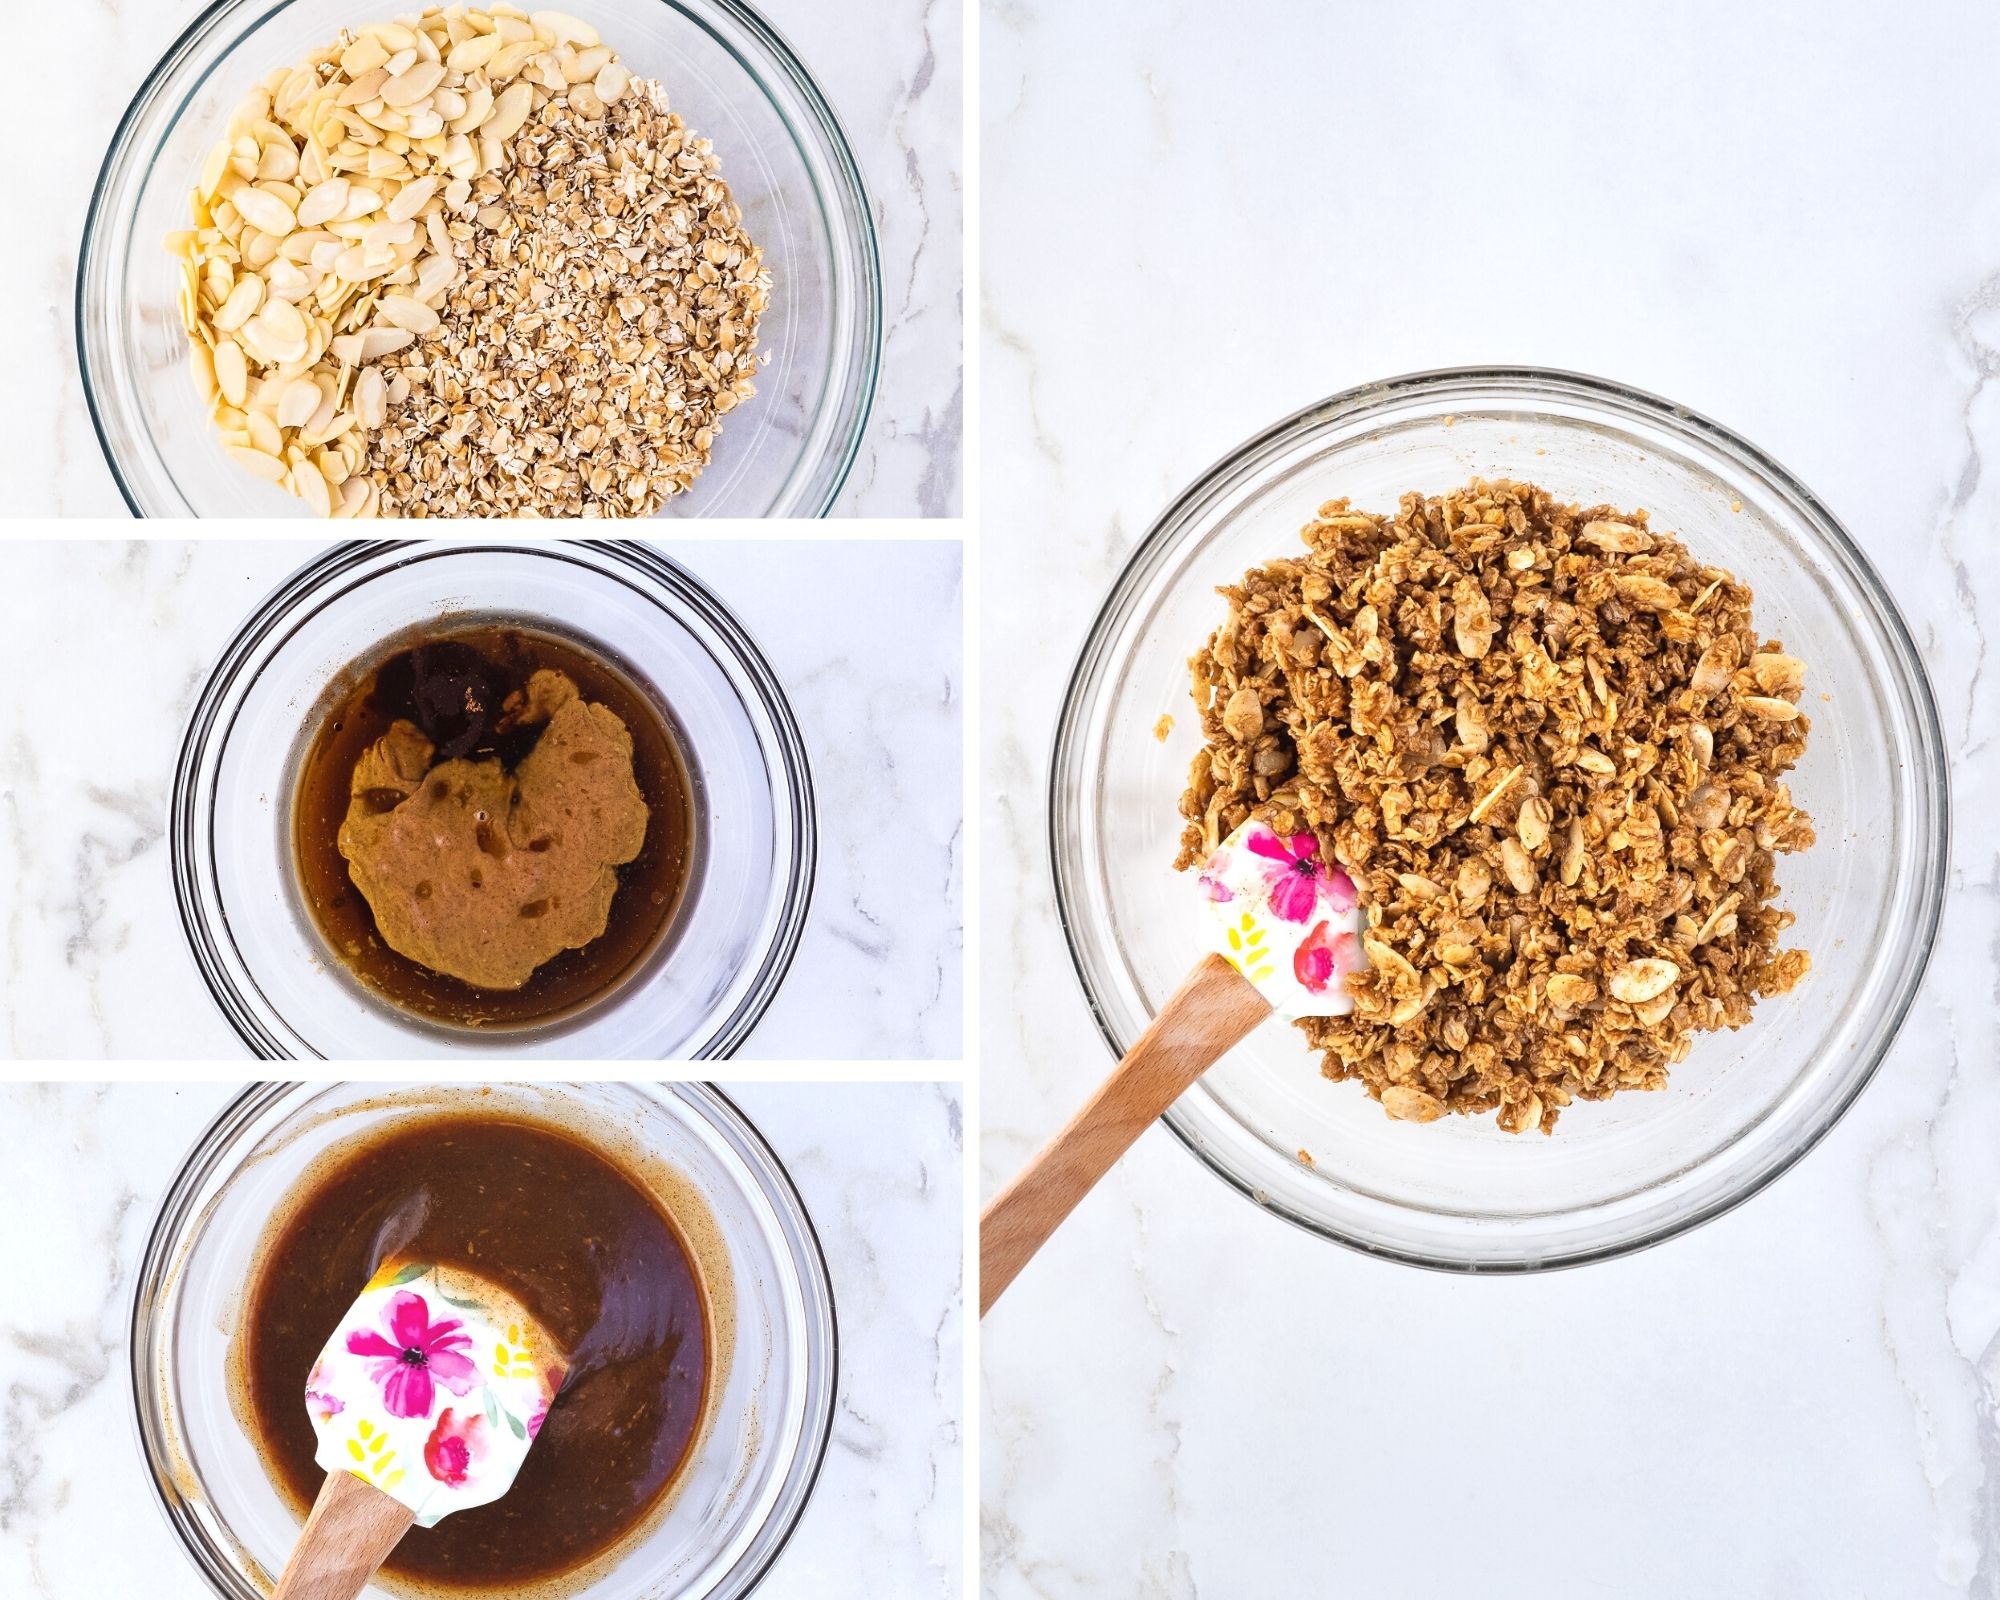 Step-by-step images of how to make homemade granola.